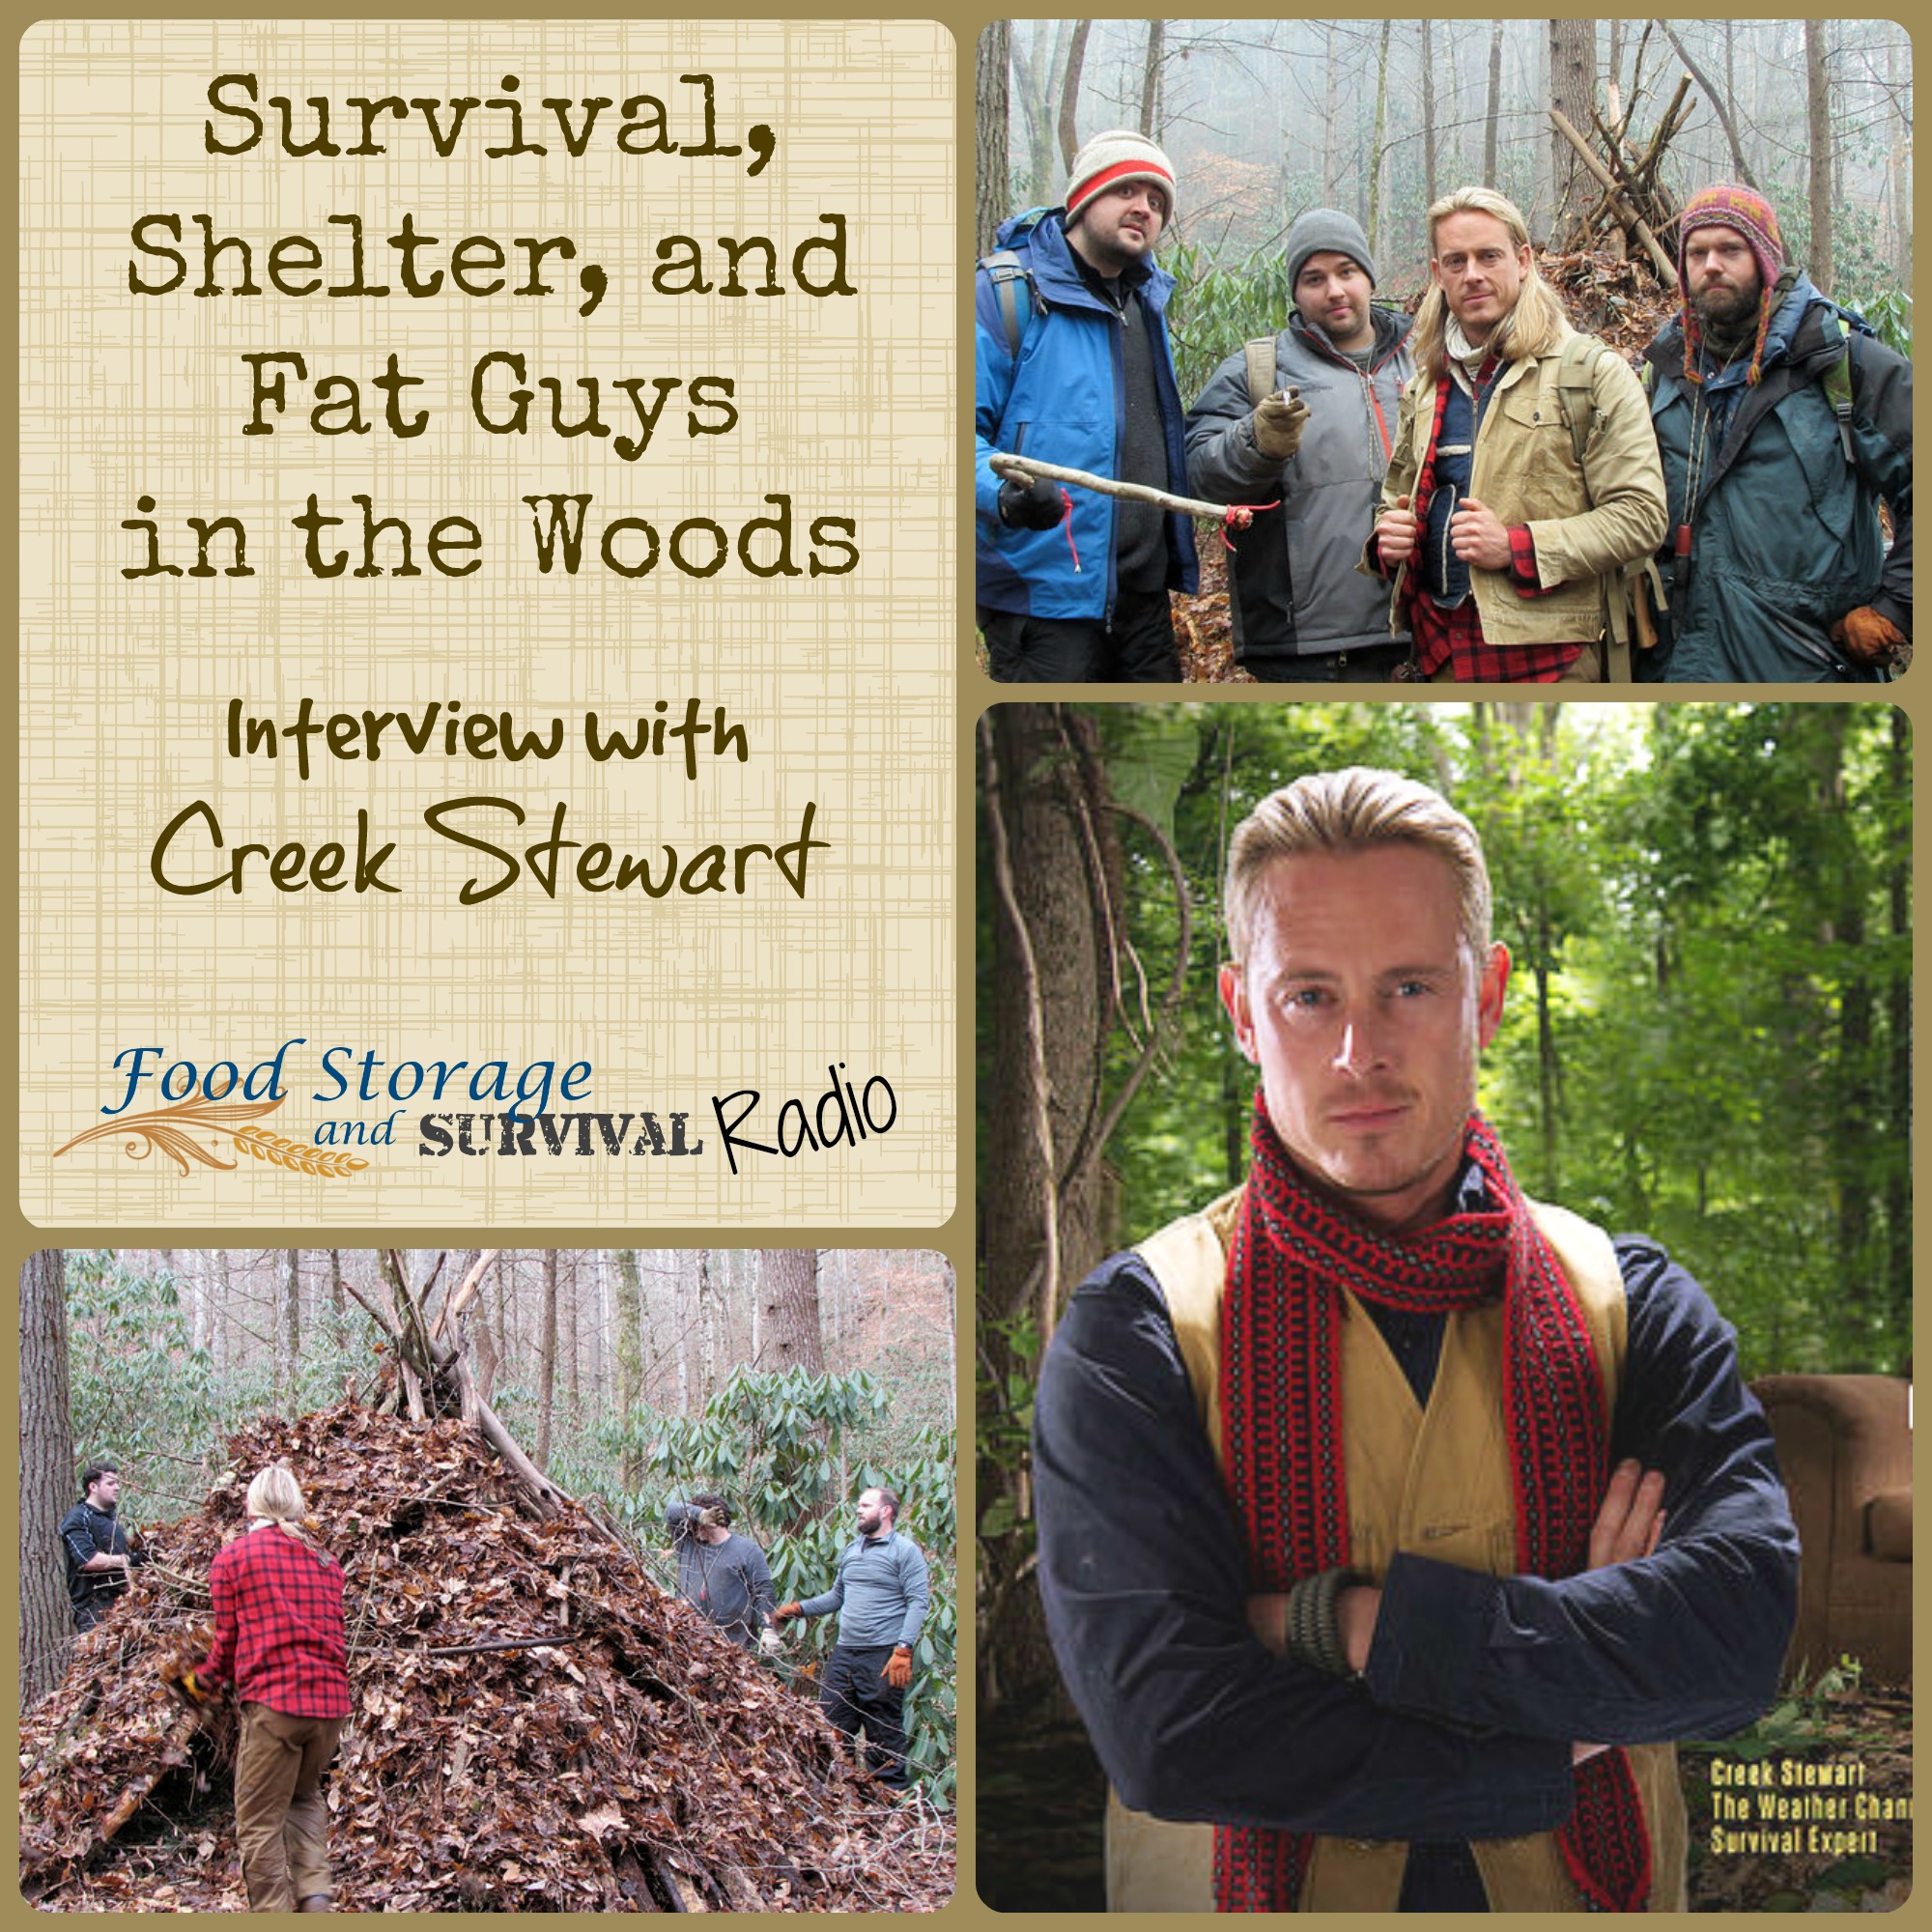 Food Storage and Survival Radio Episode 67: Survival, Shelter, and Fat Guys in the Woods with Creek Stewart